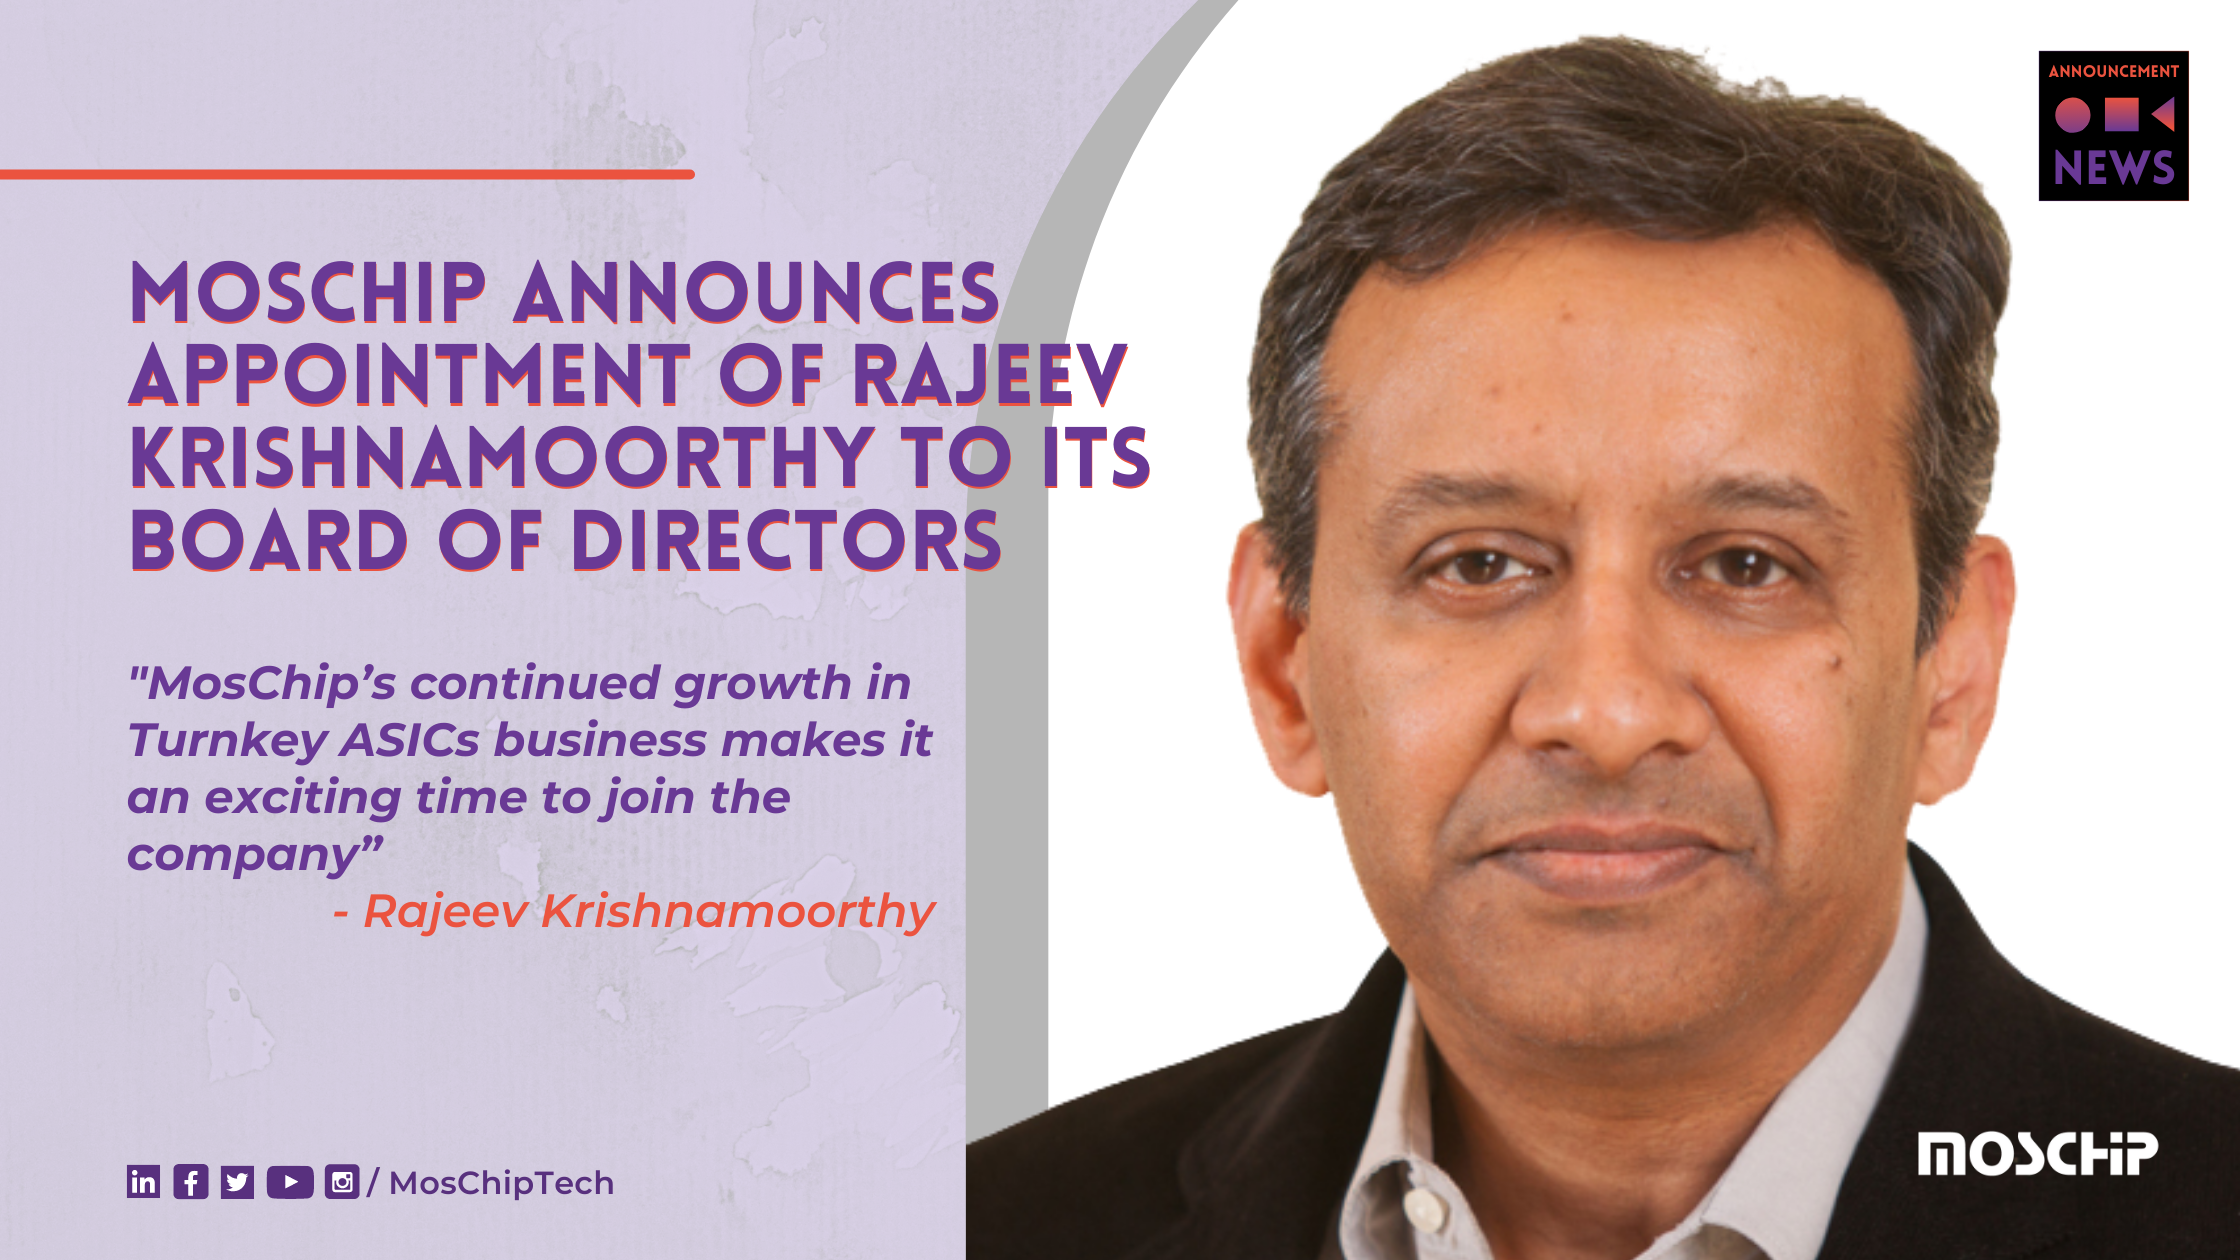 MosChip Announces Appointment of Rajeev Krishnamoorthy to its Board of Directors-press release